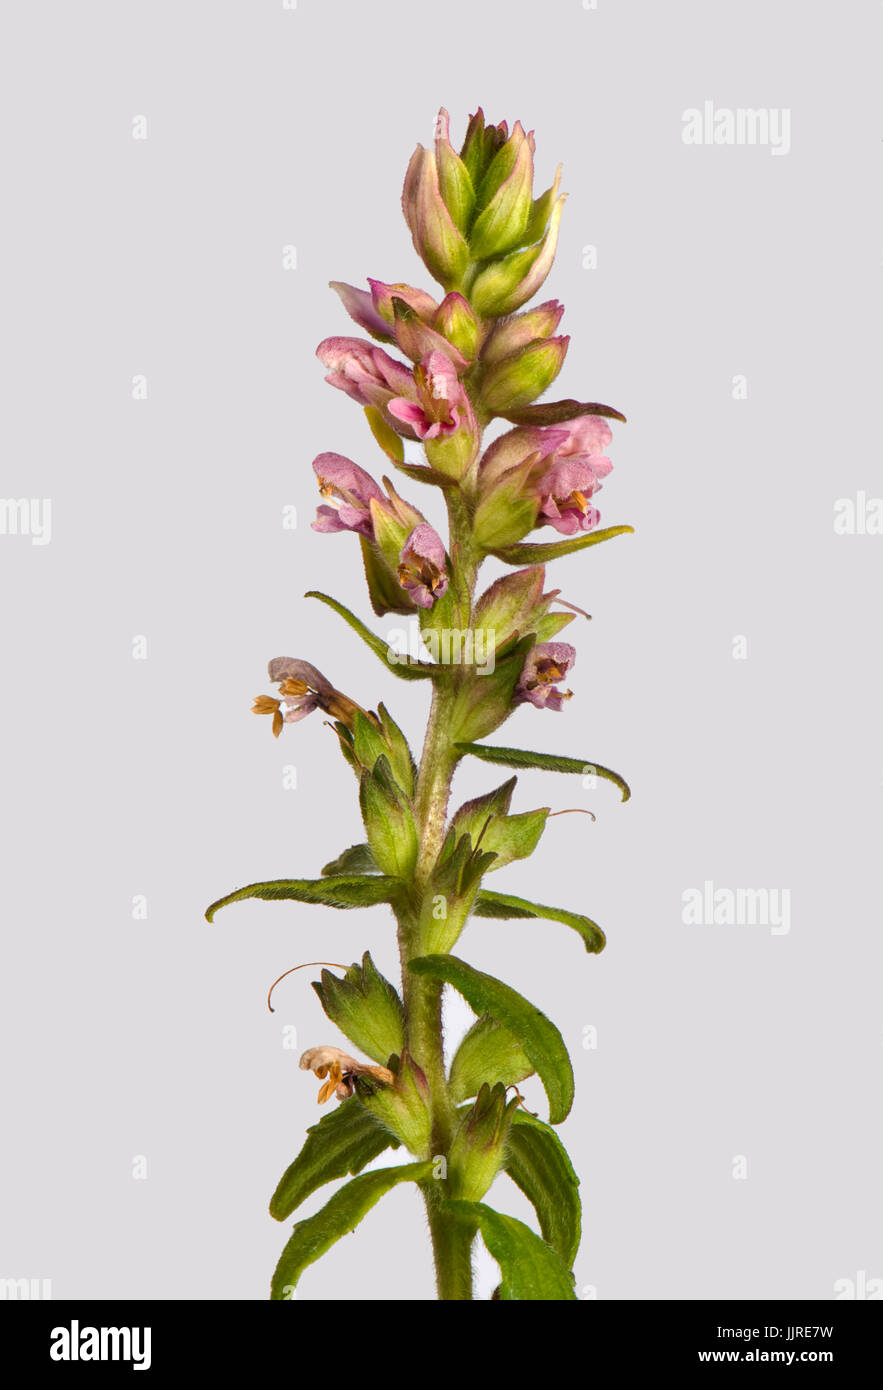 Flower spike of red bartsia, Odontites vernus, a partial parasite of grass against a white background, Berkshire, July Stock Photo